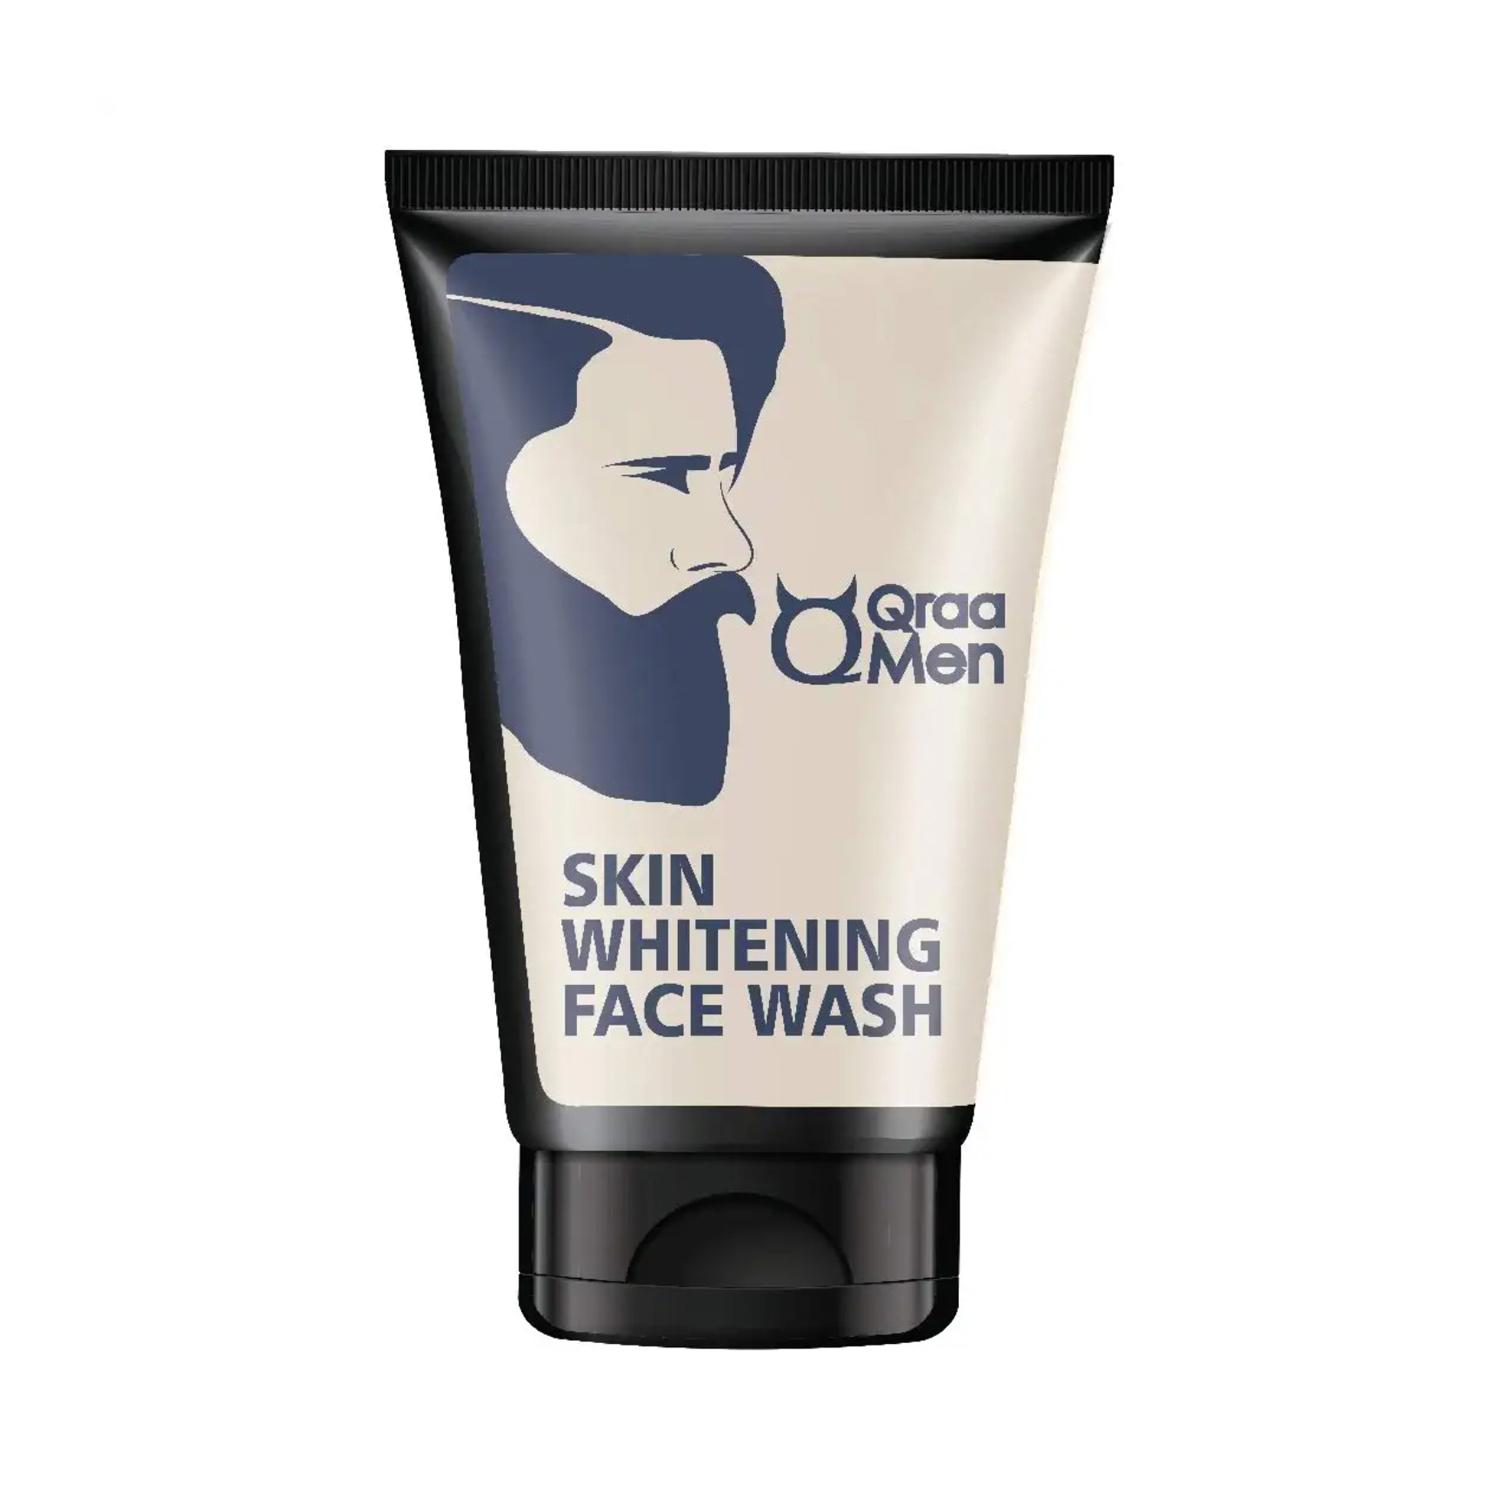 Qraamen Skin Whitening Face Wash for Men with Yogurt and Oatmeal (100 g)